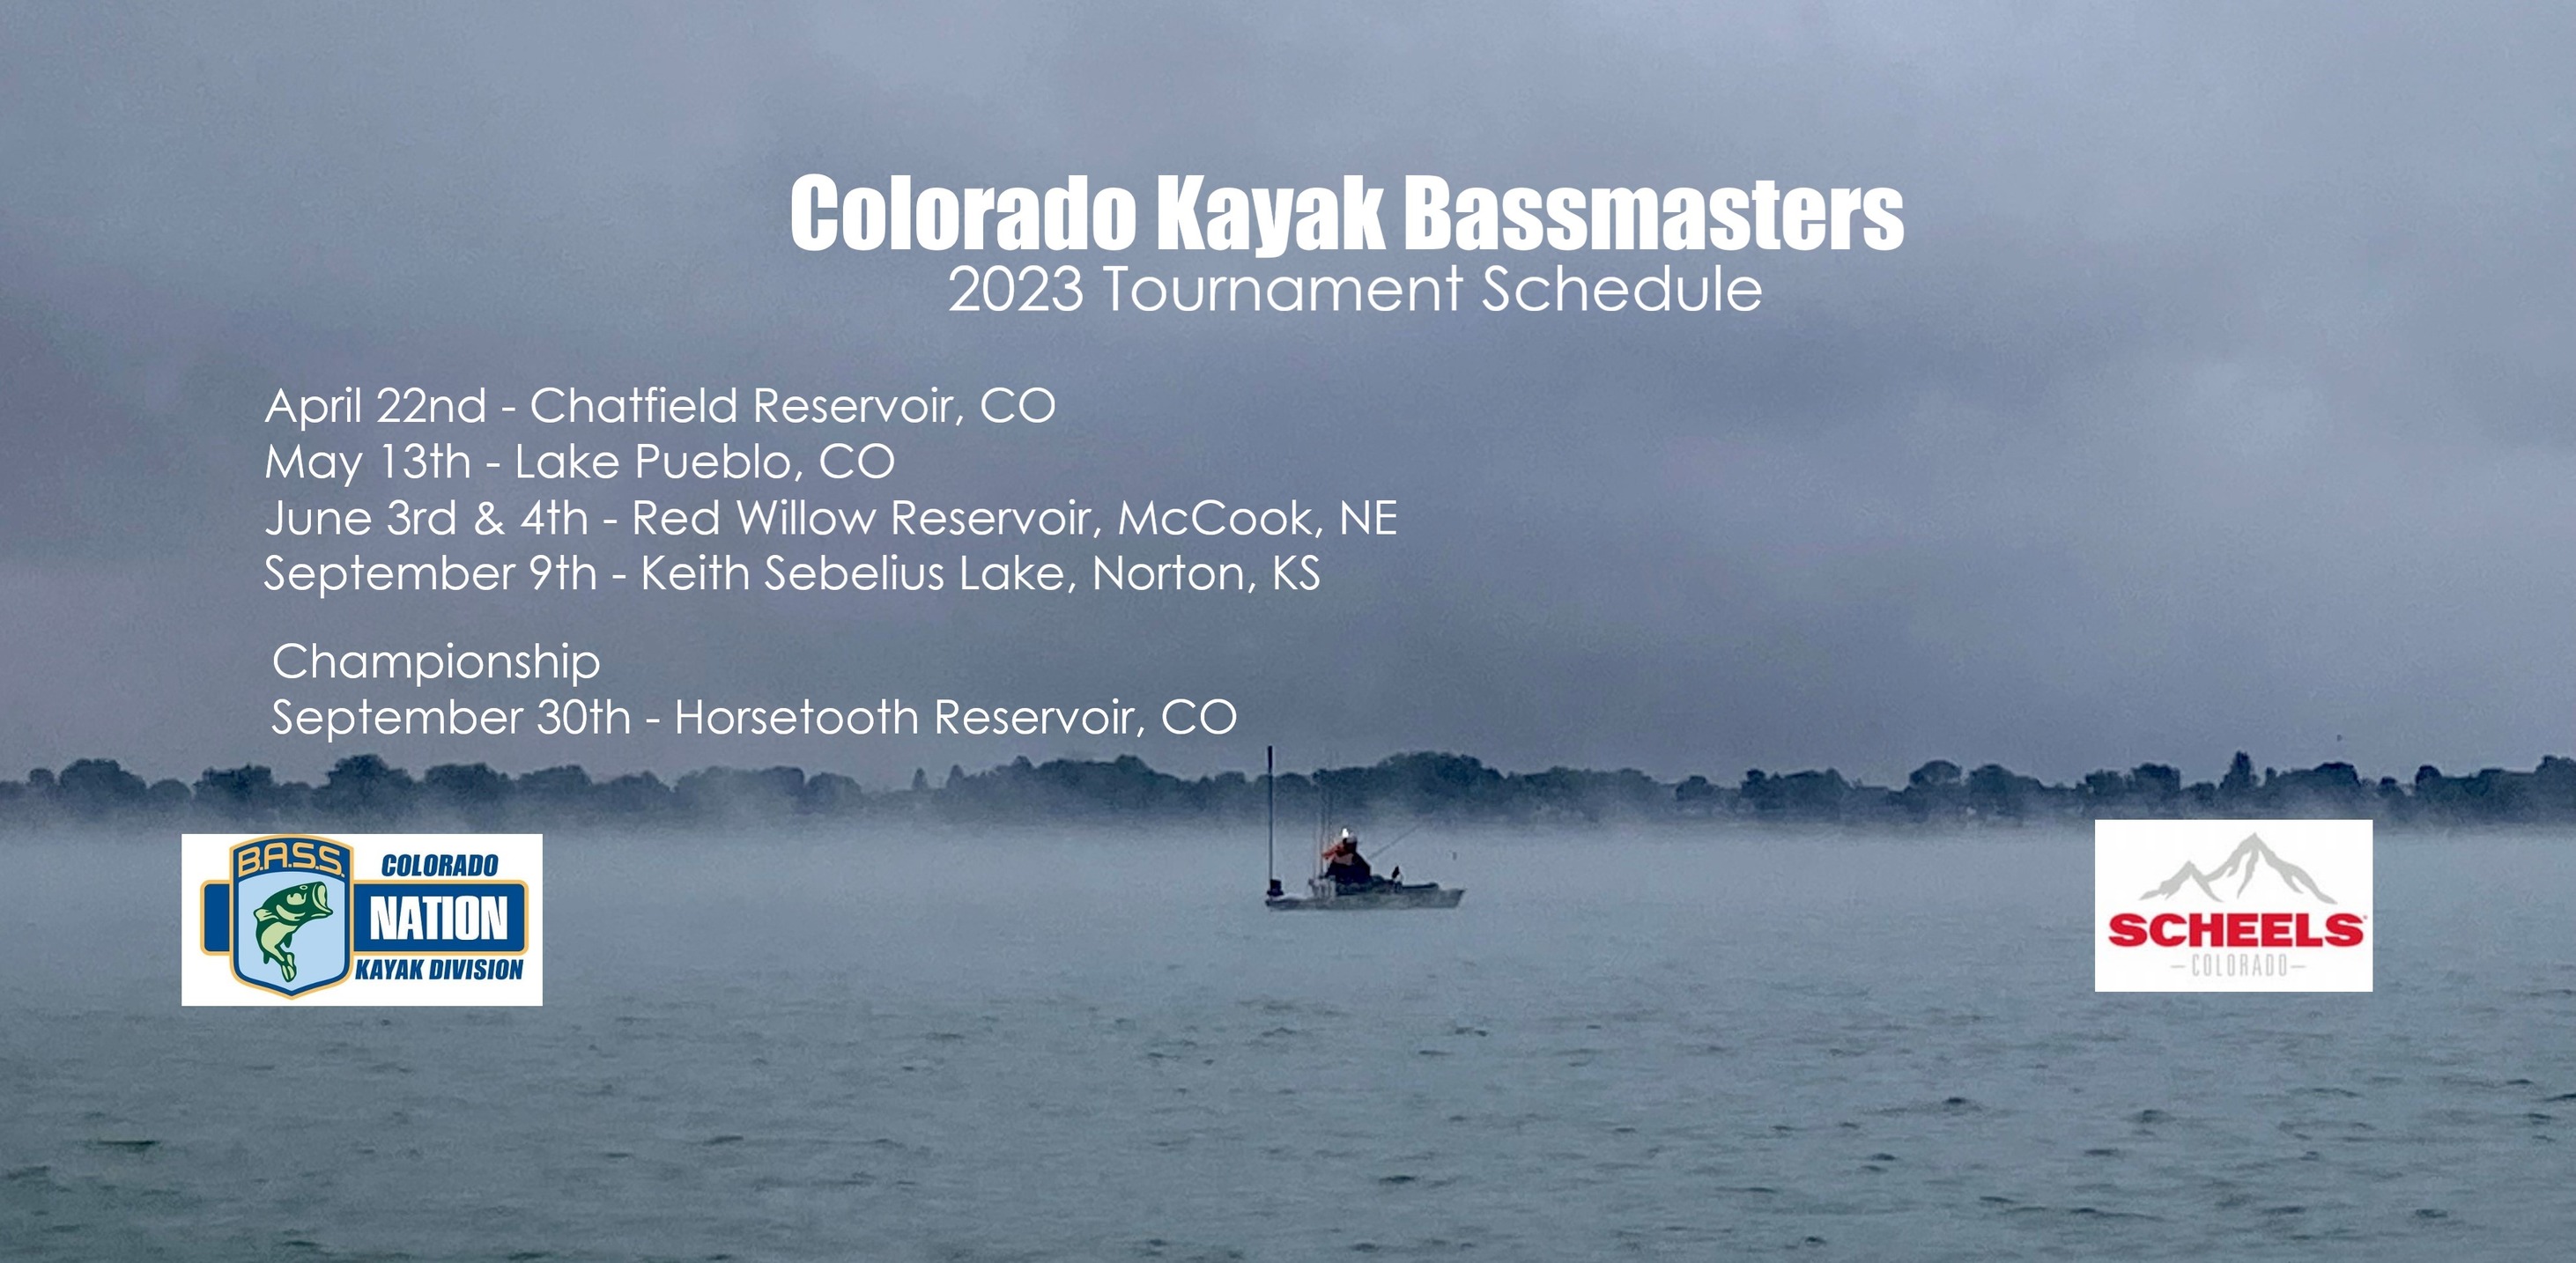 2023 schedule for the Colorado Kayak Bassmasters